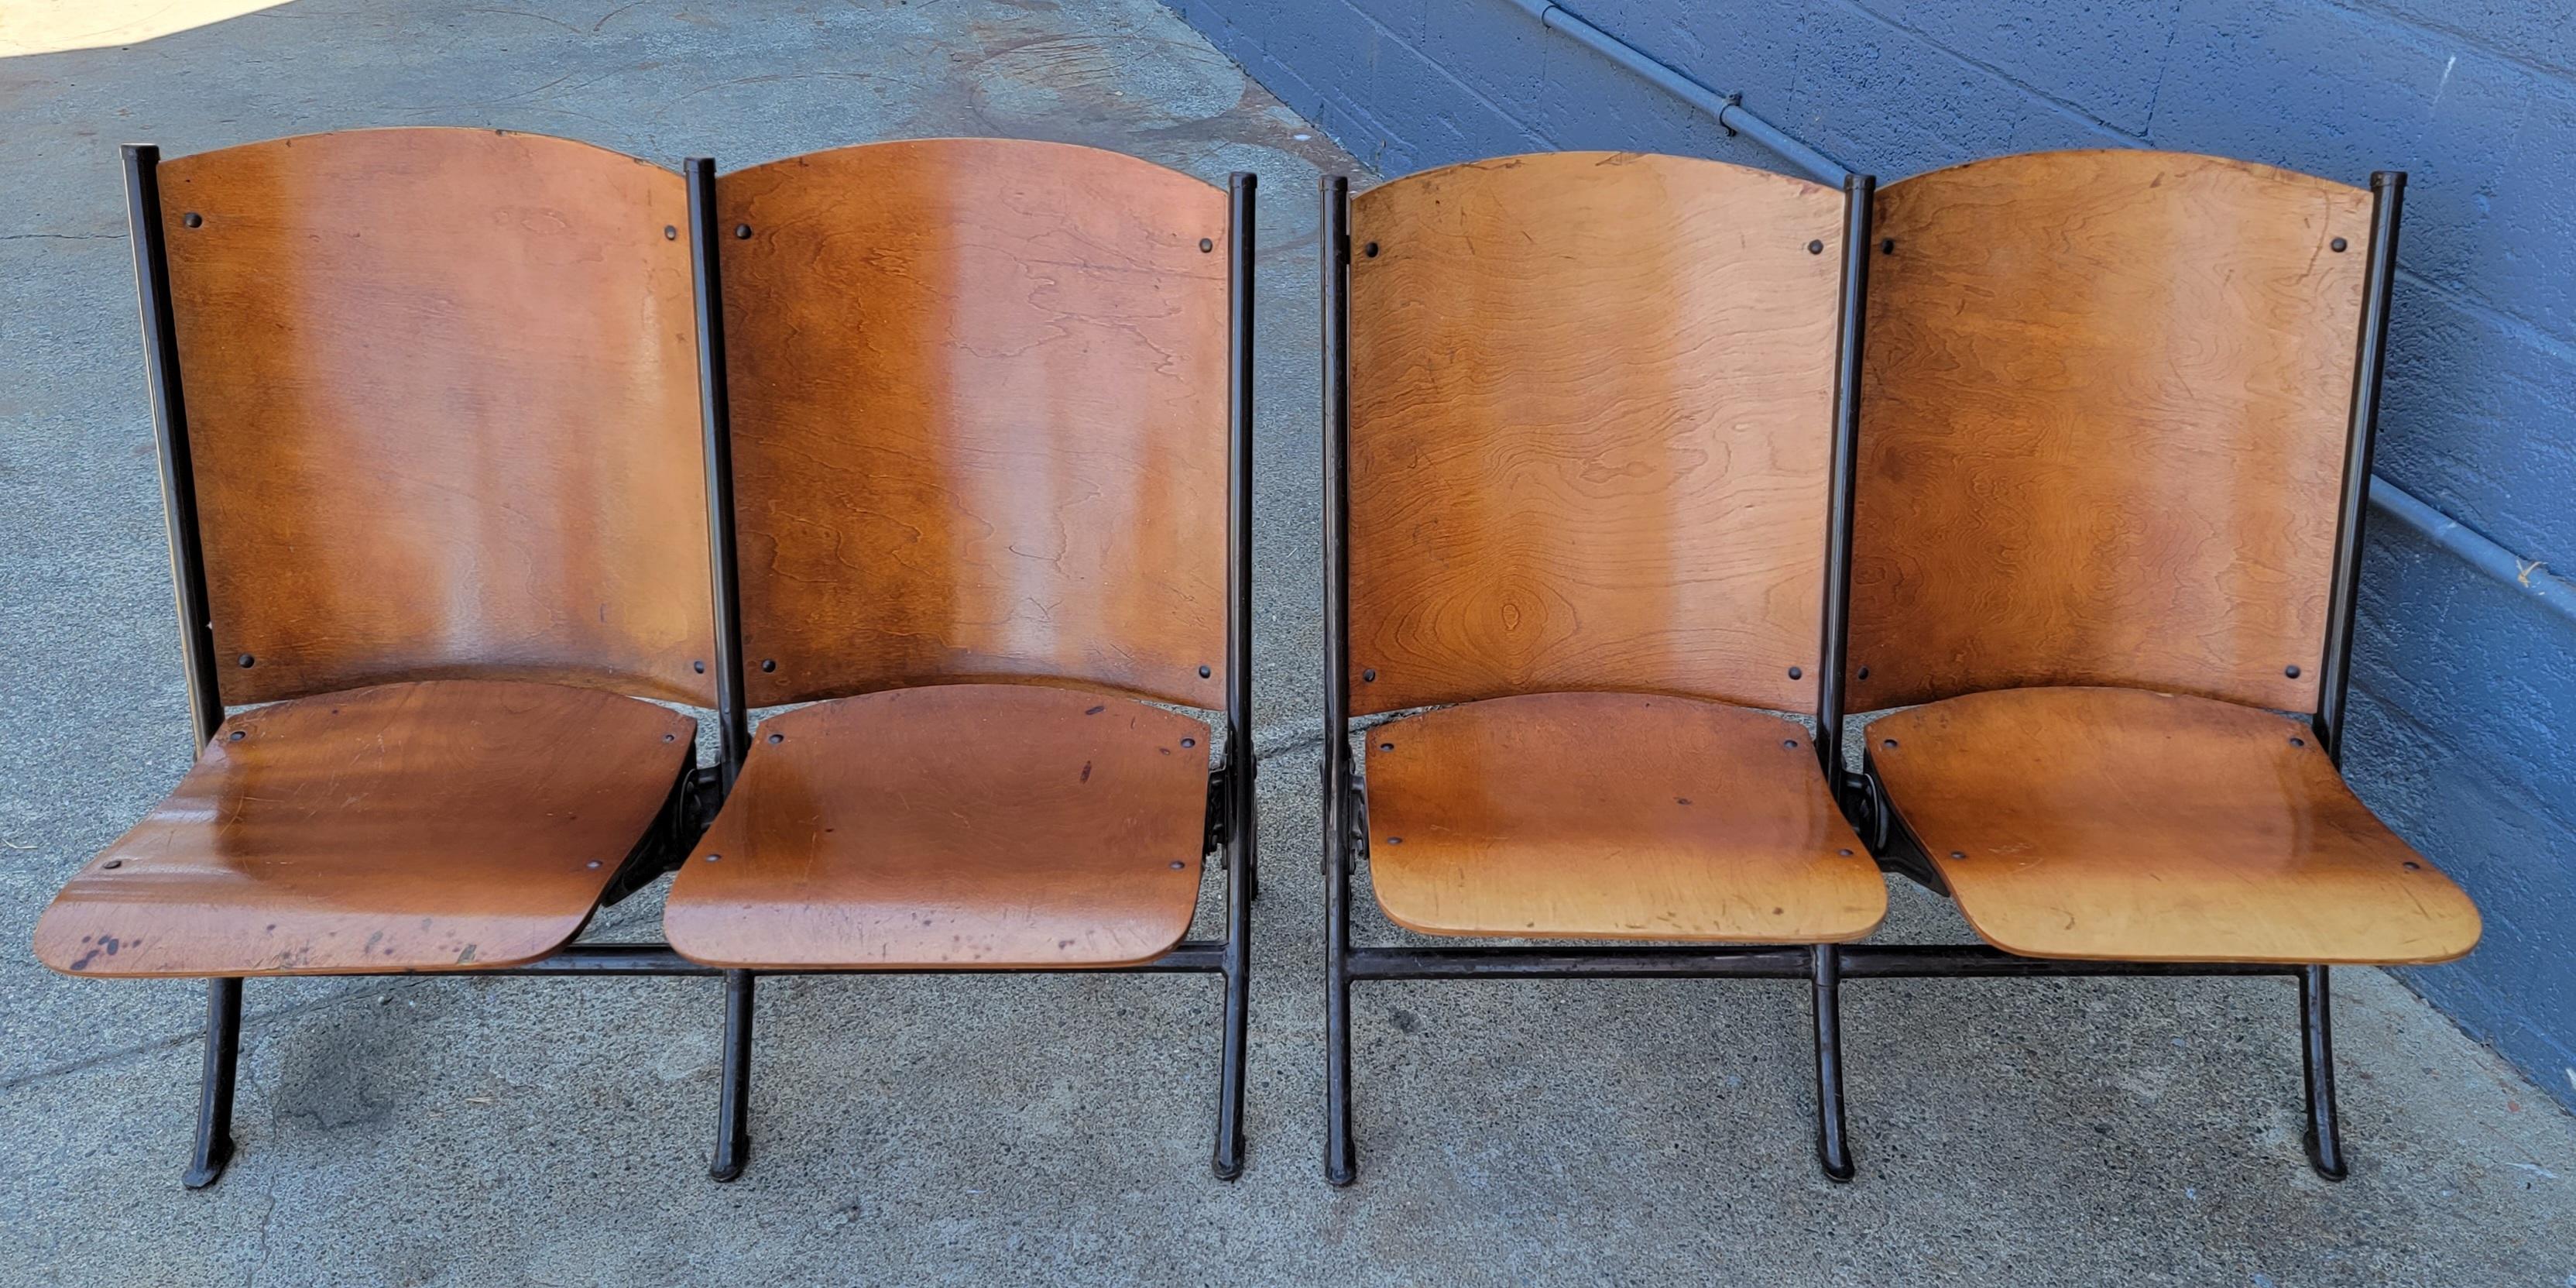 Rustic, industrial pair of 2 seat folding auditorium or theater chairs. Steamed plywood seats and backs mounted to painted steel frames. In original, unaltered condition. Wonderful patina from use and history. I was informed by previous owner that